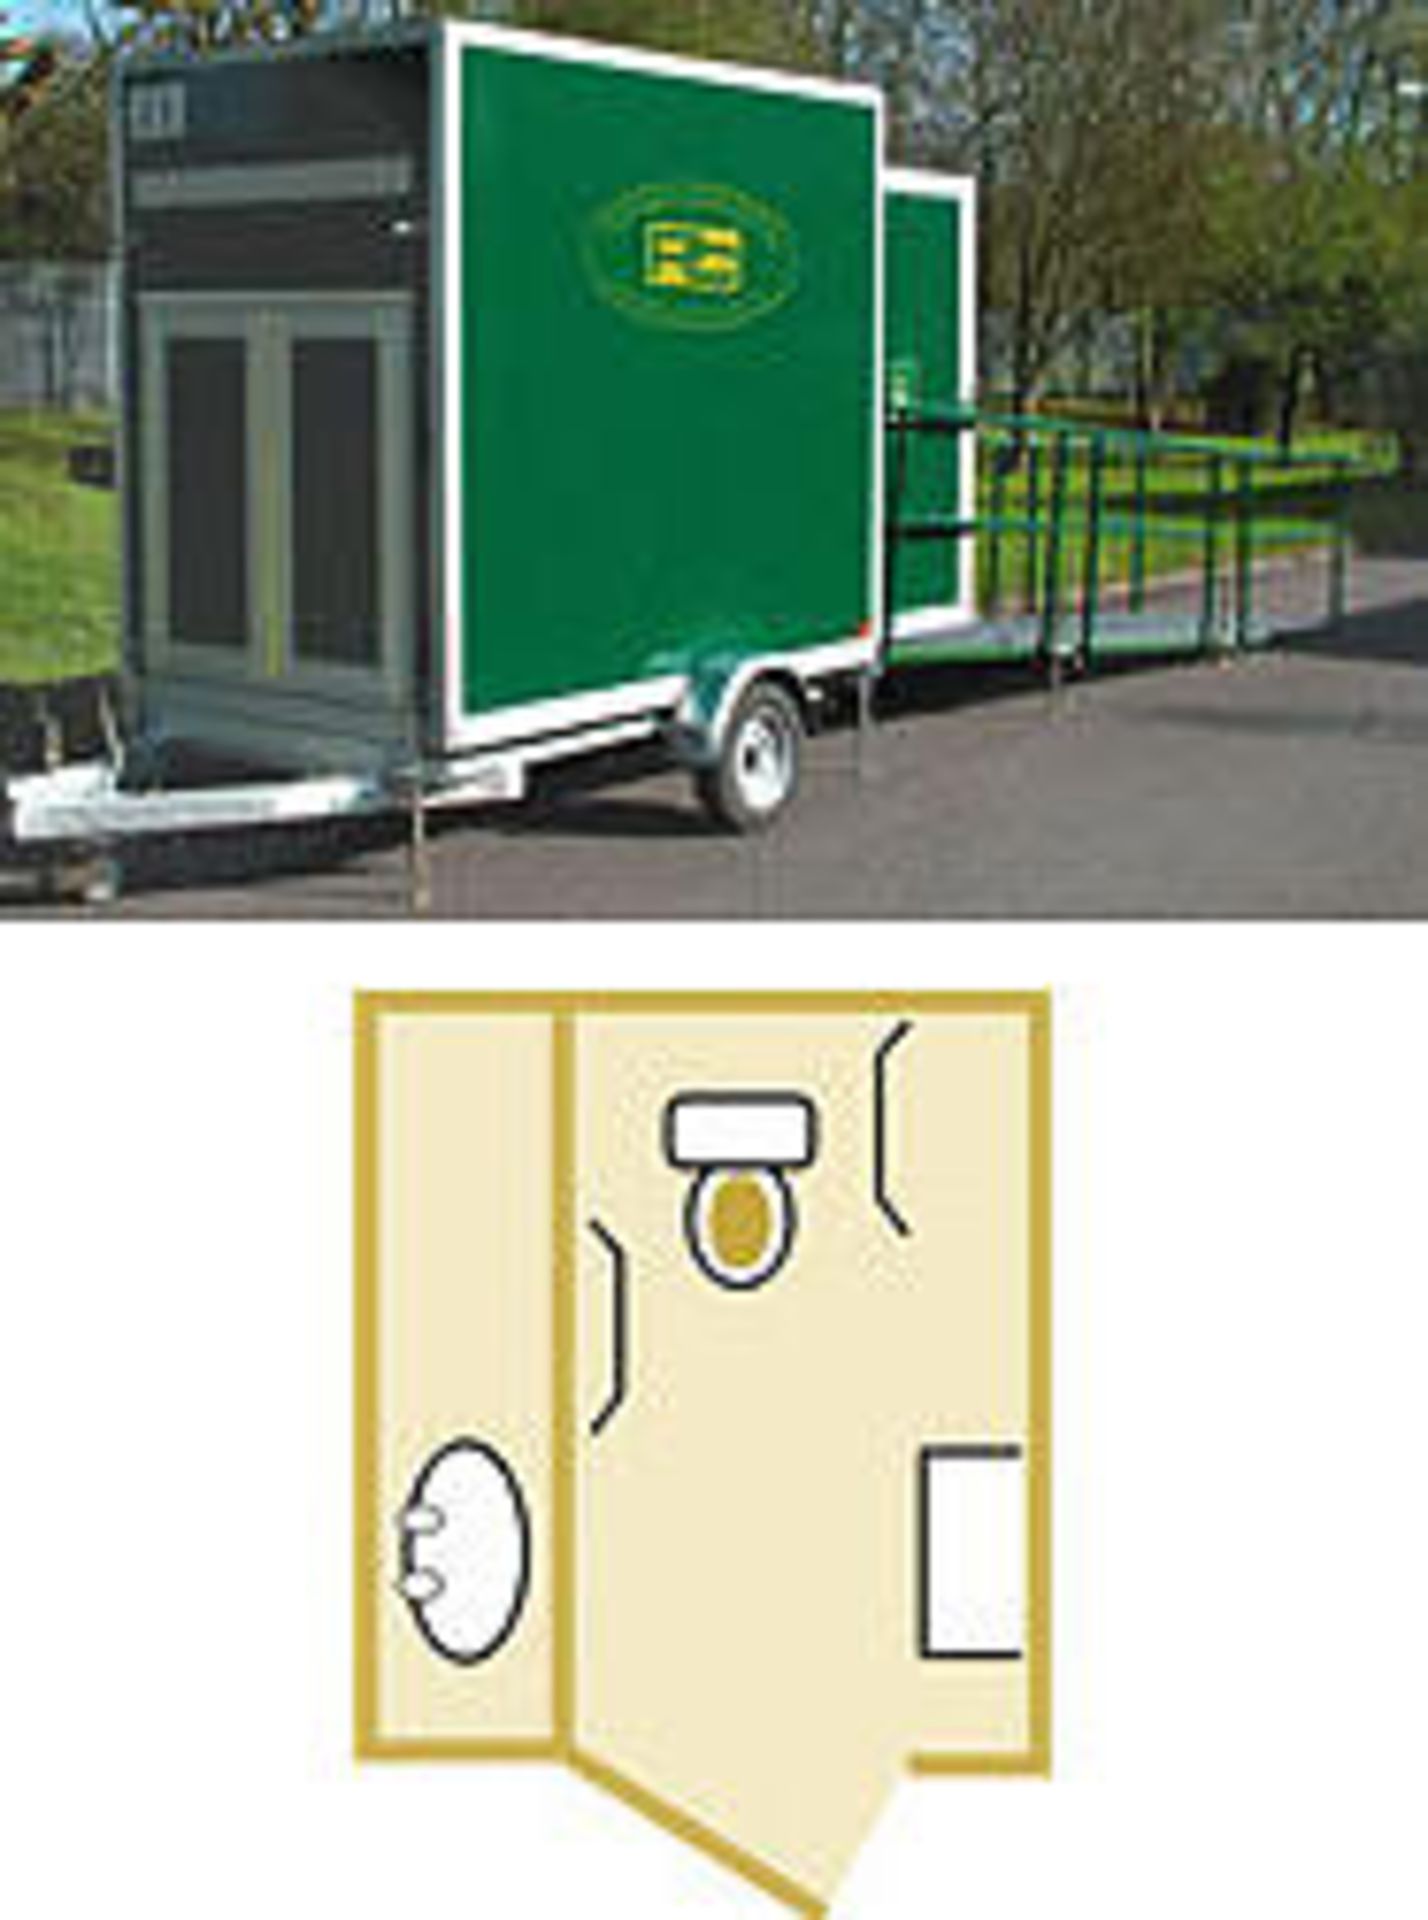 Disabled unisex luxury toilet with baby changing, access ramp and walk rails on single axle - Image 13 of 13